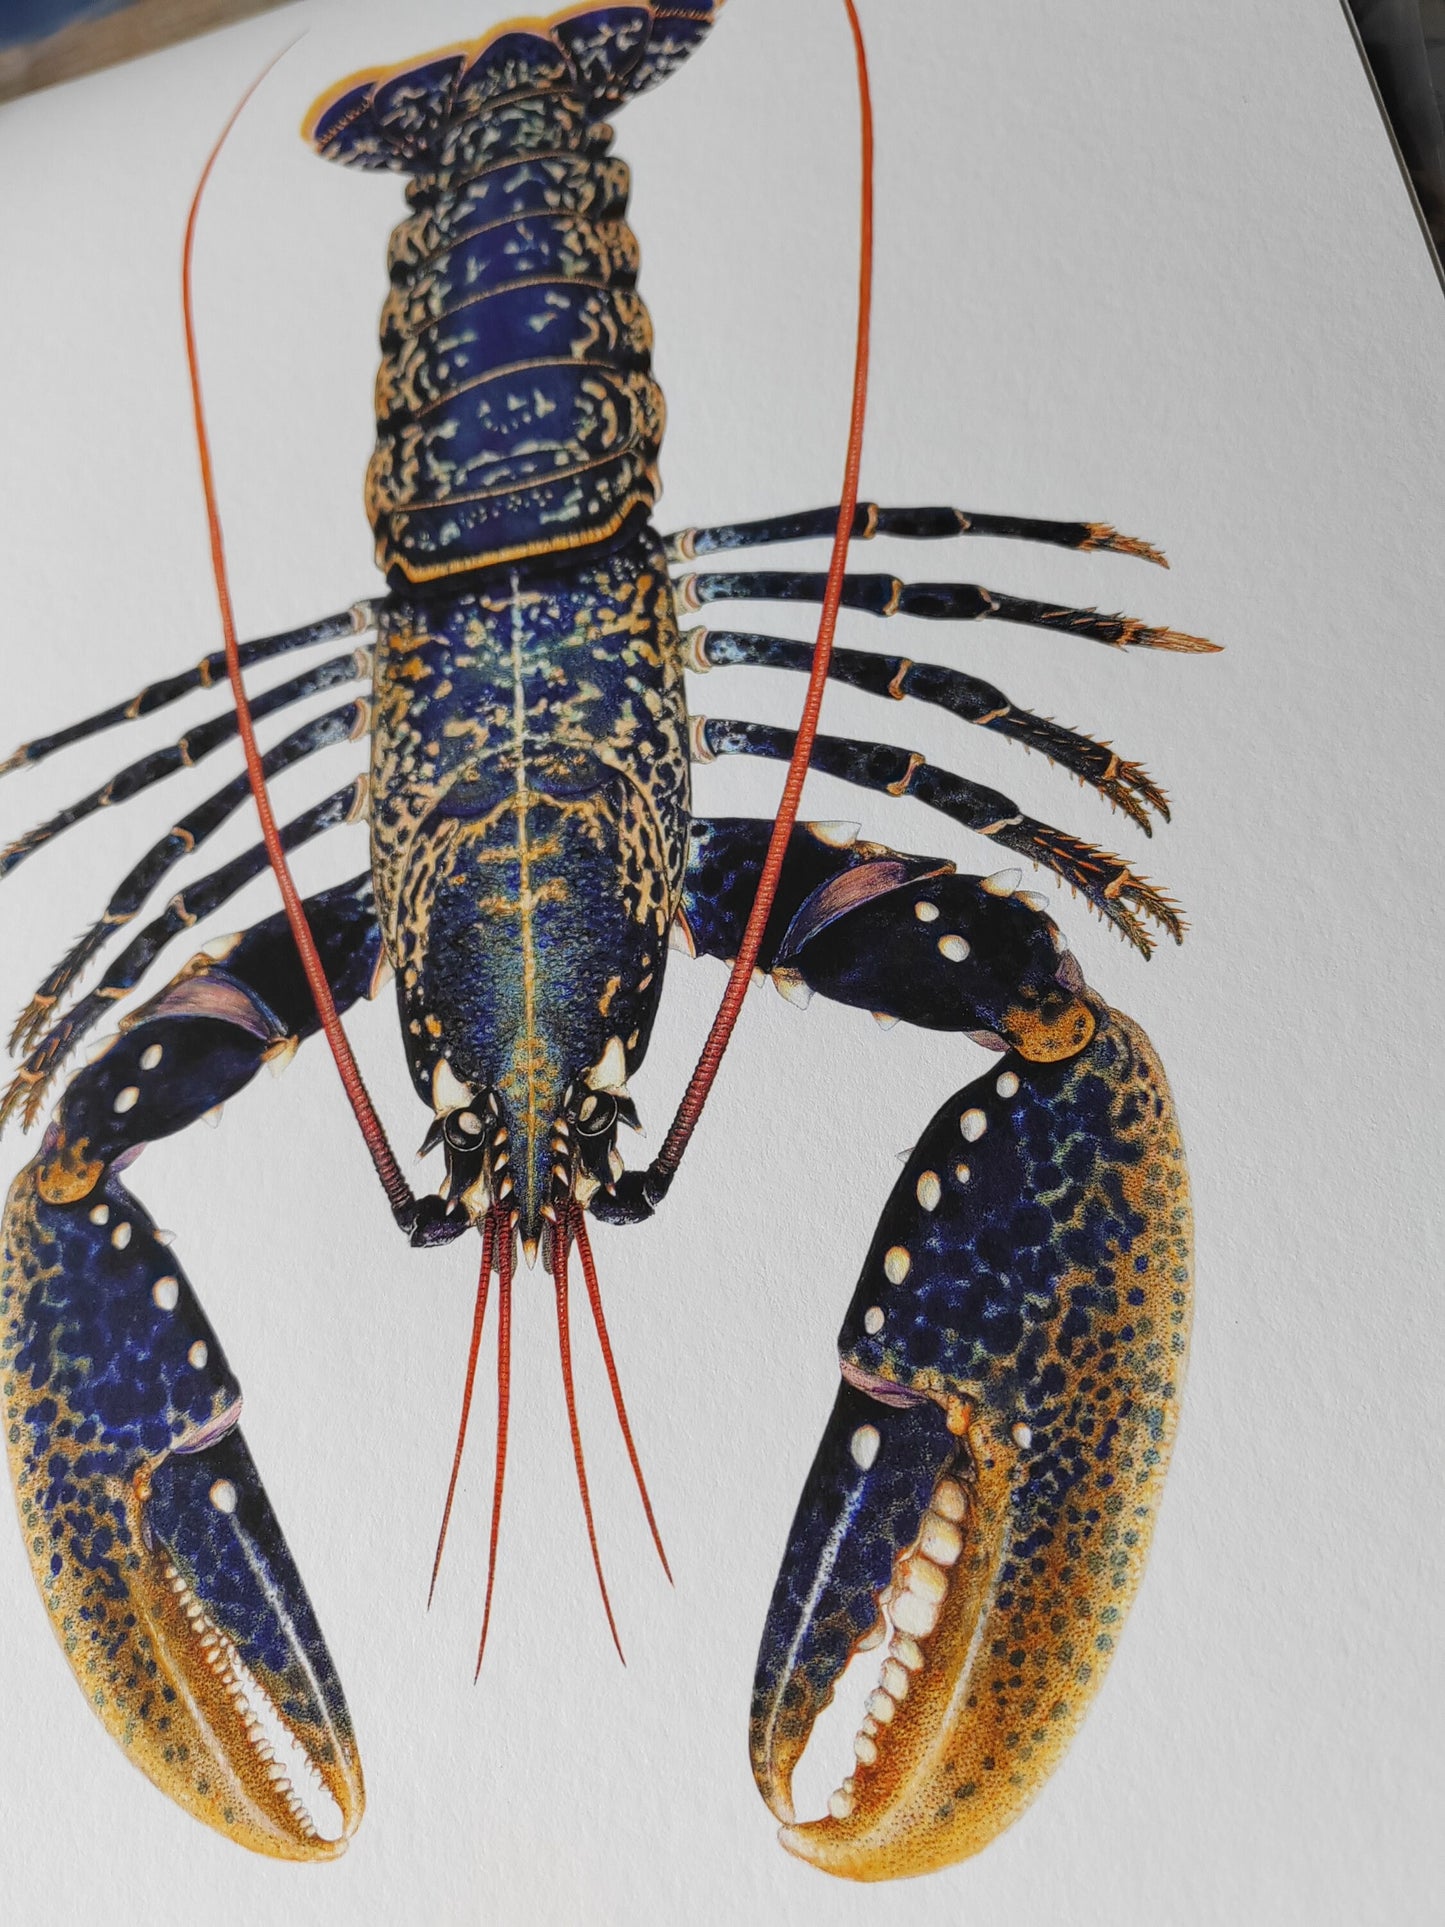 Homarus gammarus, Lobster A3 size limited edition art print